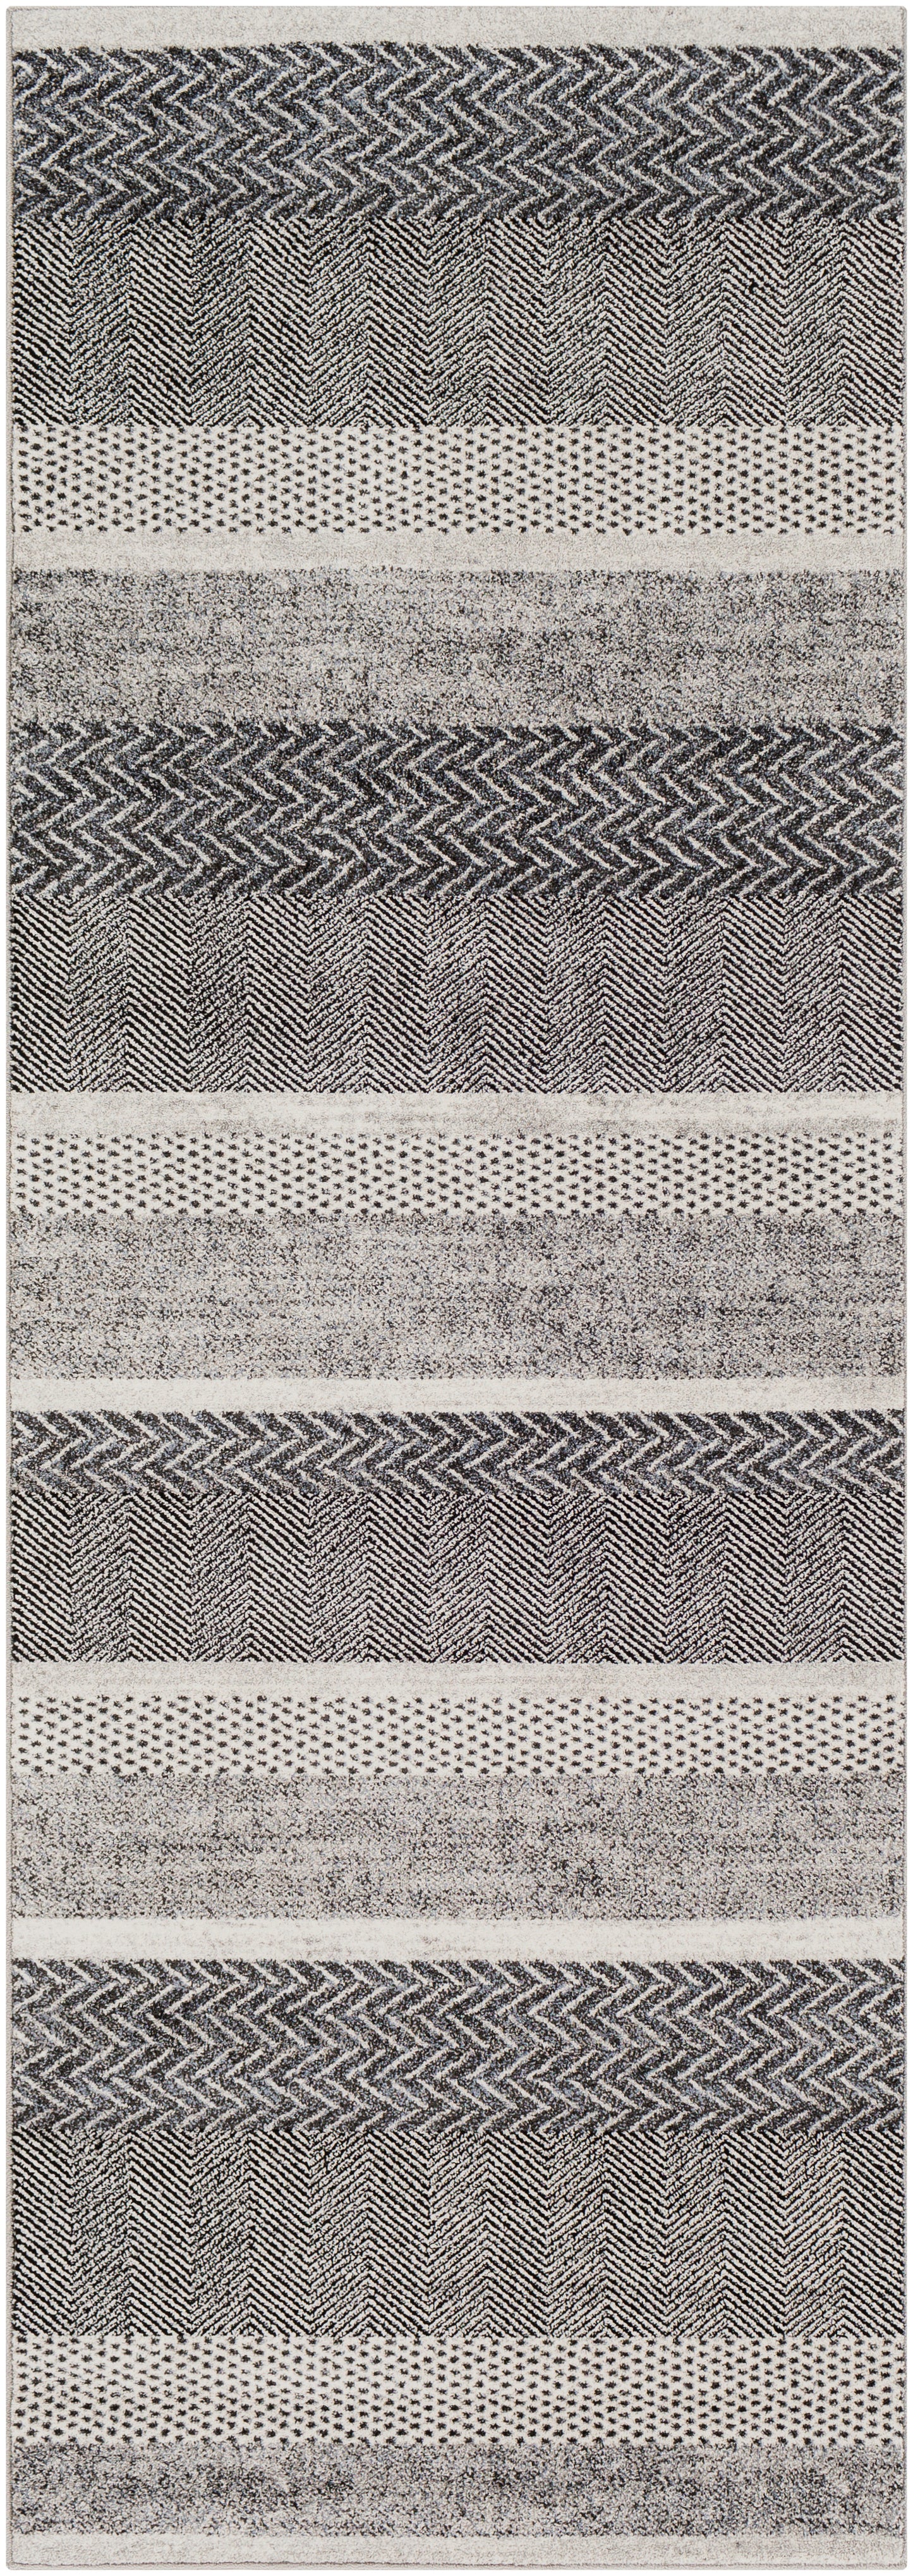 Nepali 23957 Machine Woven Synthetic Blend Indoor Area Rug by Surya Rugs